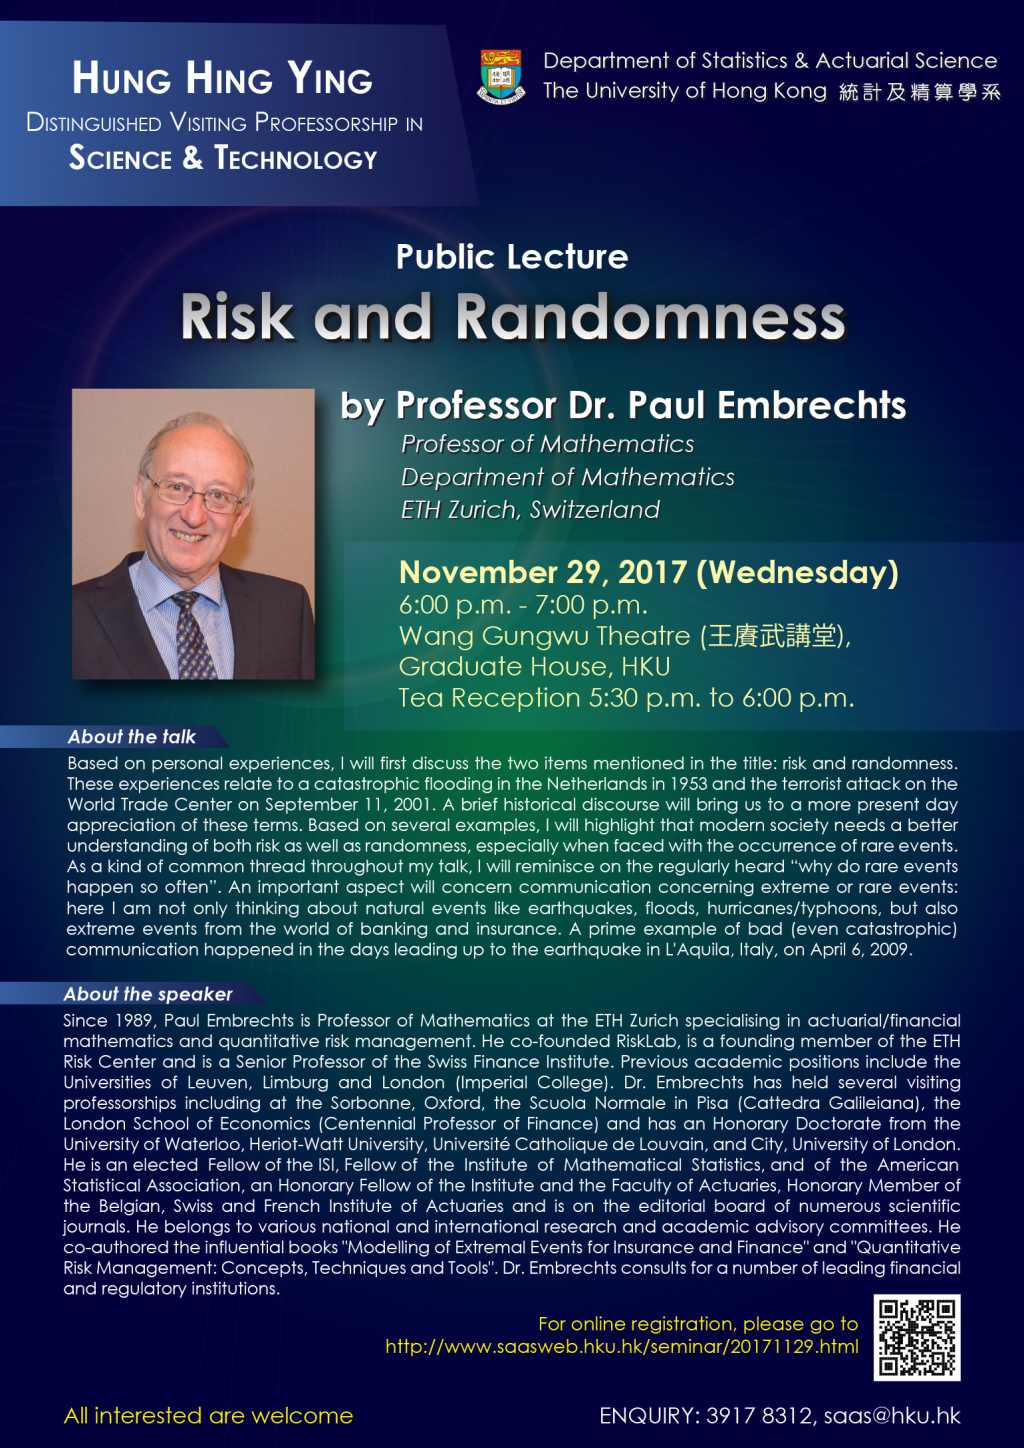 Hung Hing Ying Distinguished Visiting Professorship in Sci & Technology: 'Risk and Randomness' by Prof. Dr. Paul Embrechts on NOV 29, 2017